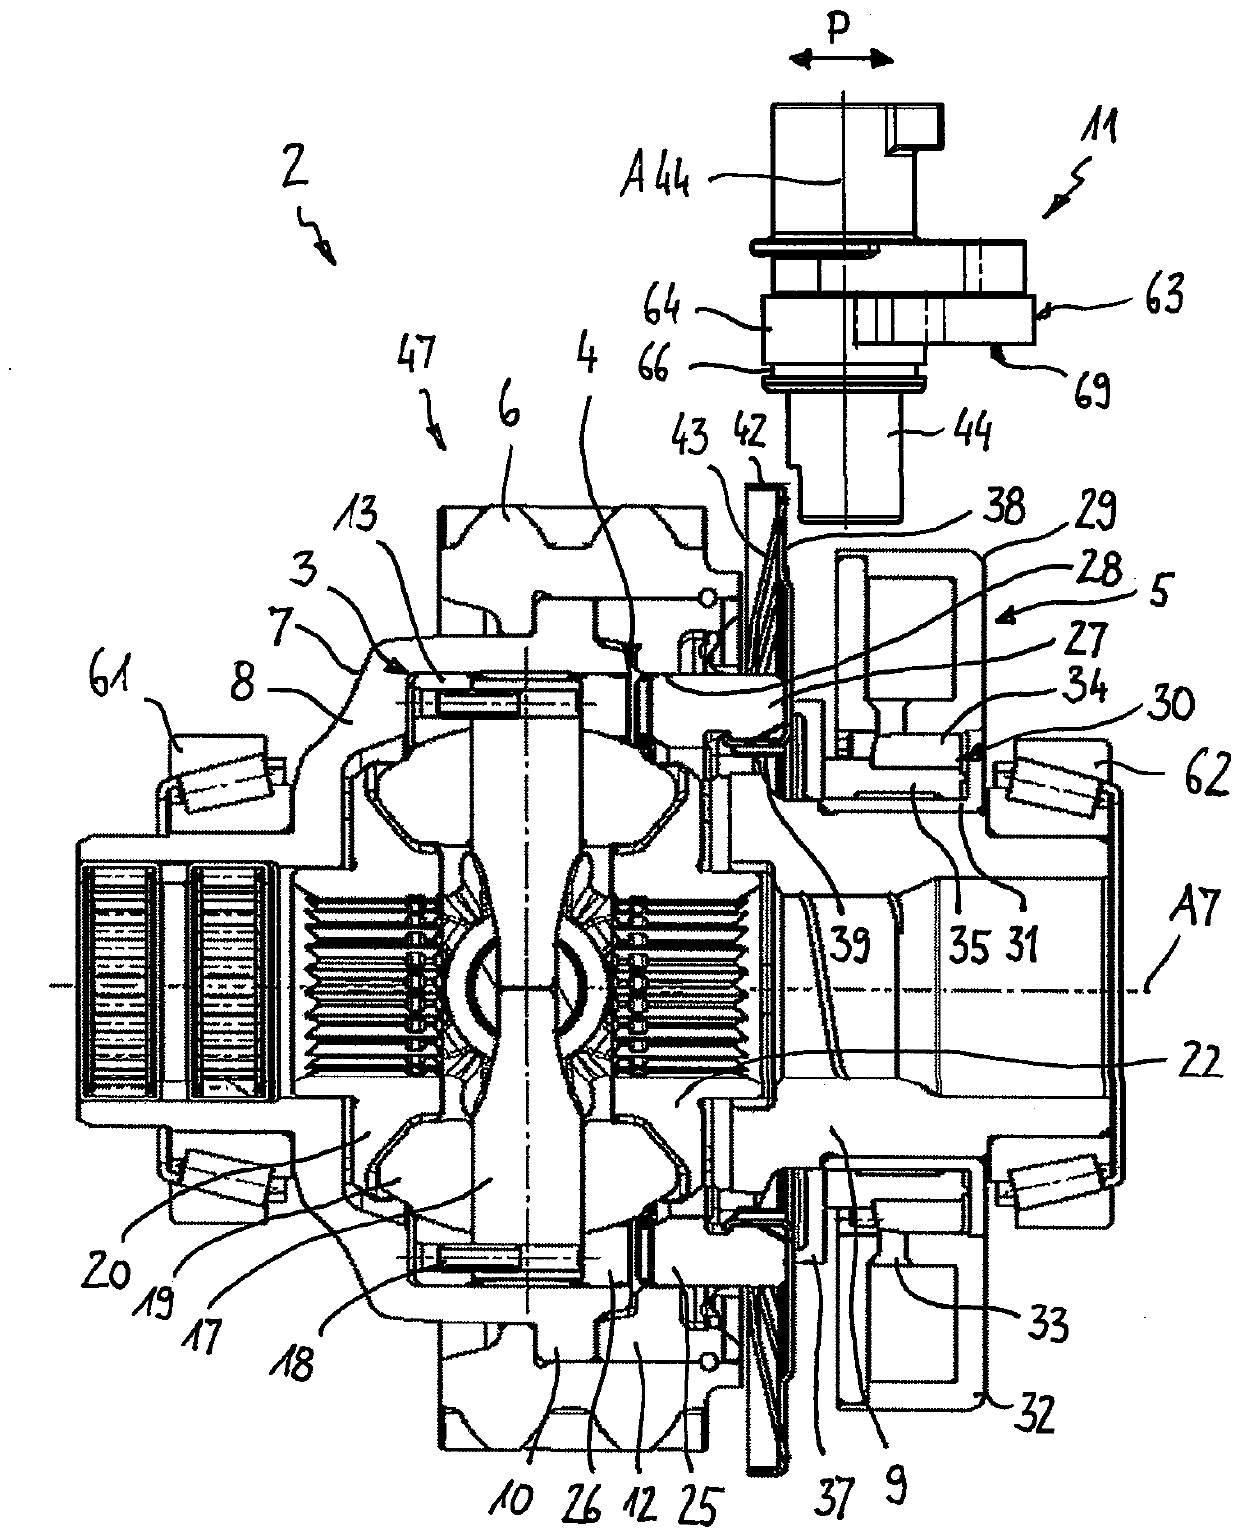 Clutch assembly with sensor unit and drive assembly with such clutch assembly